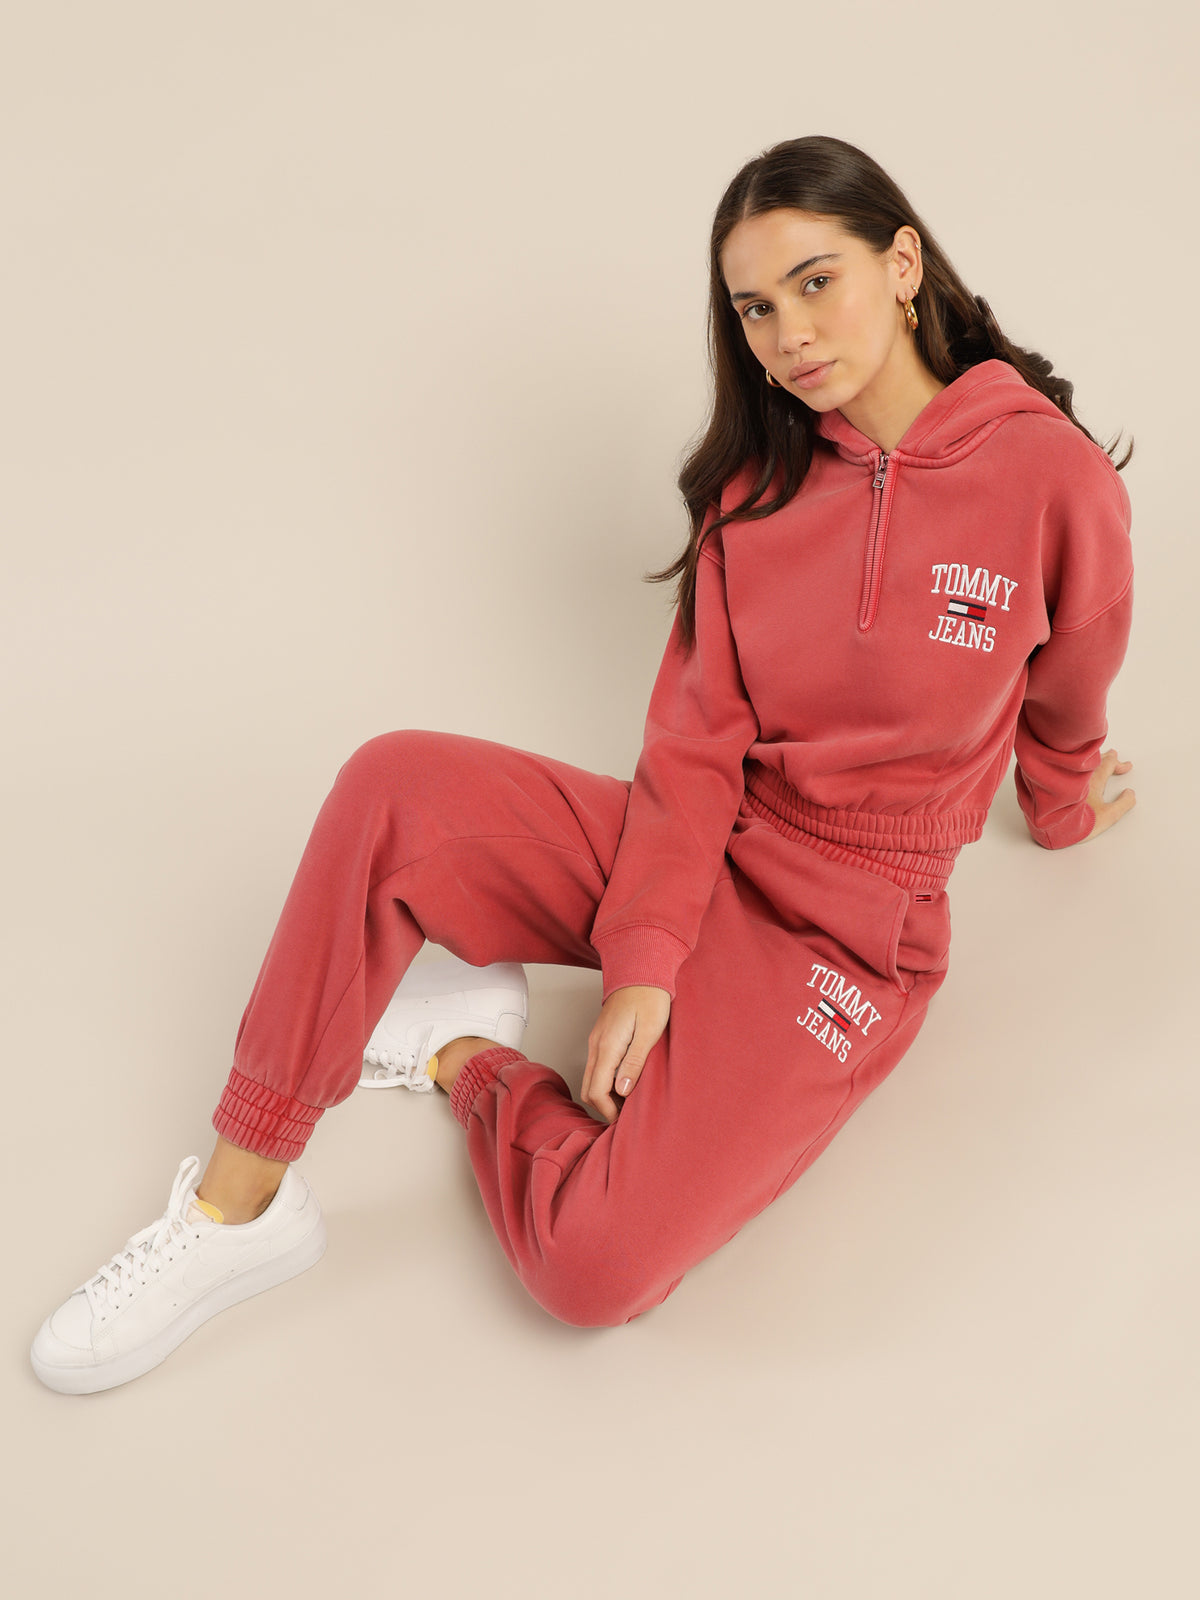 Relaxed Fit Logo Joggers in Cranberry Crush